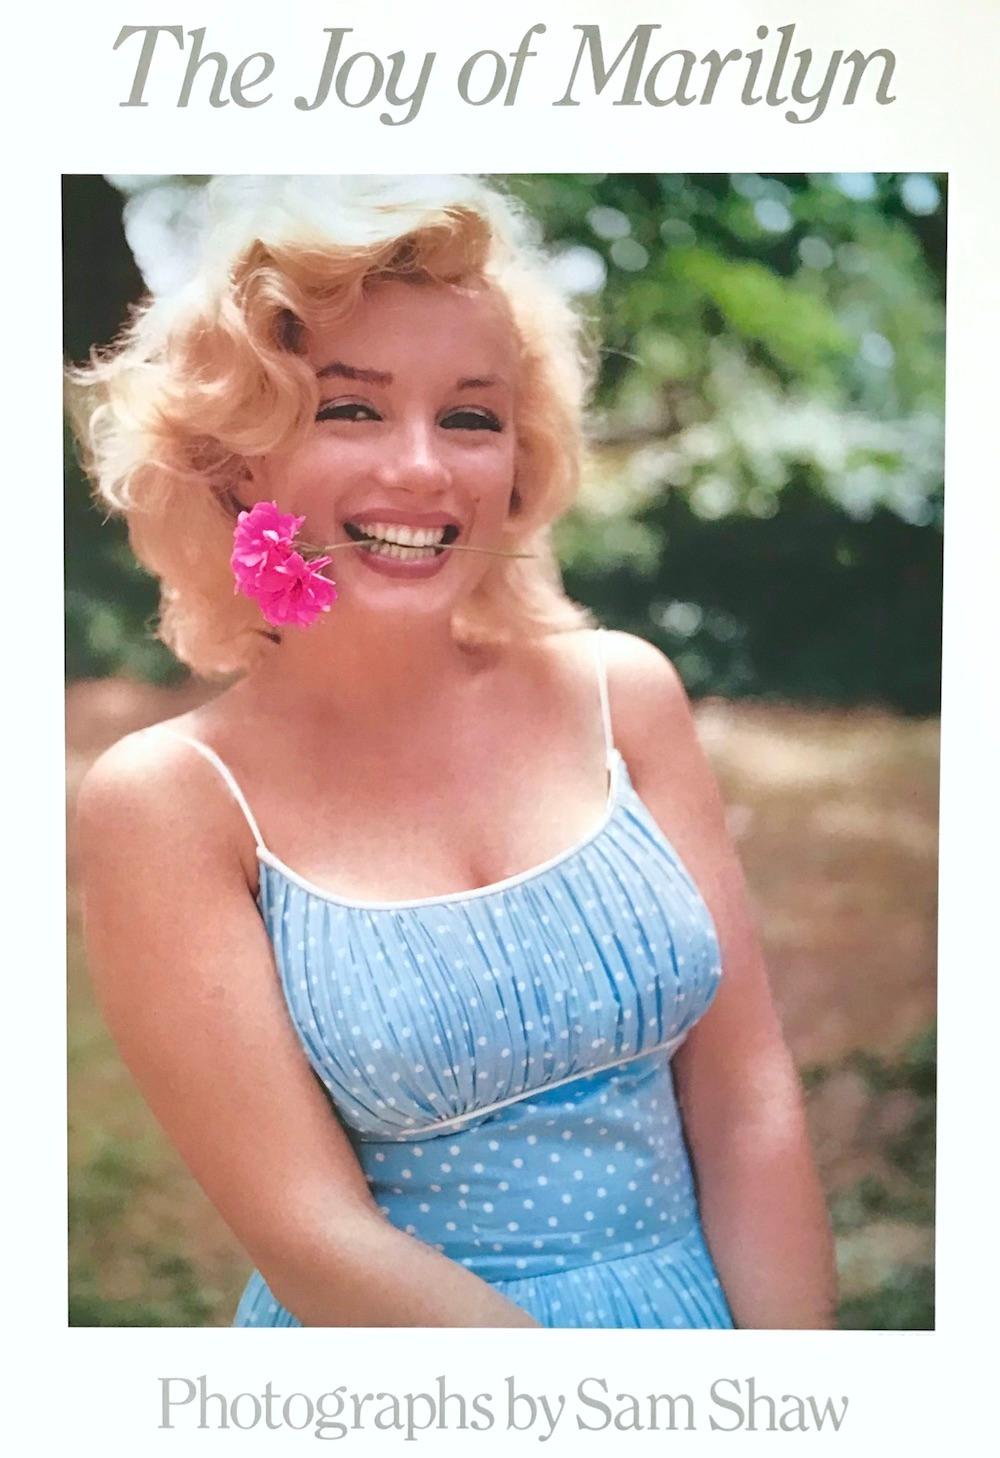 Sam Shaw THE JOY OF MARILYN 1986 Exhibition Poster, Marilyn Monroe, Summer Dress For Sale 1